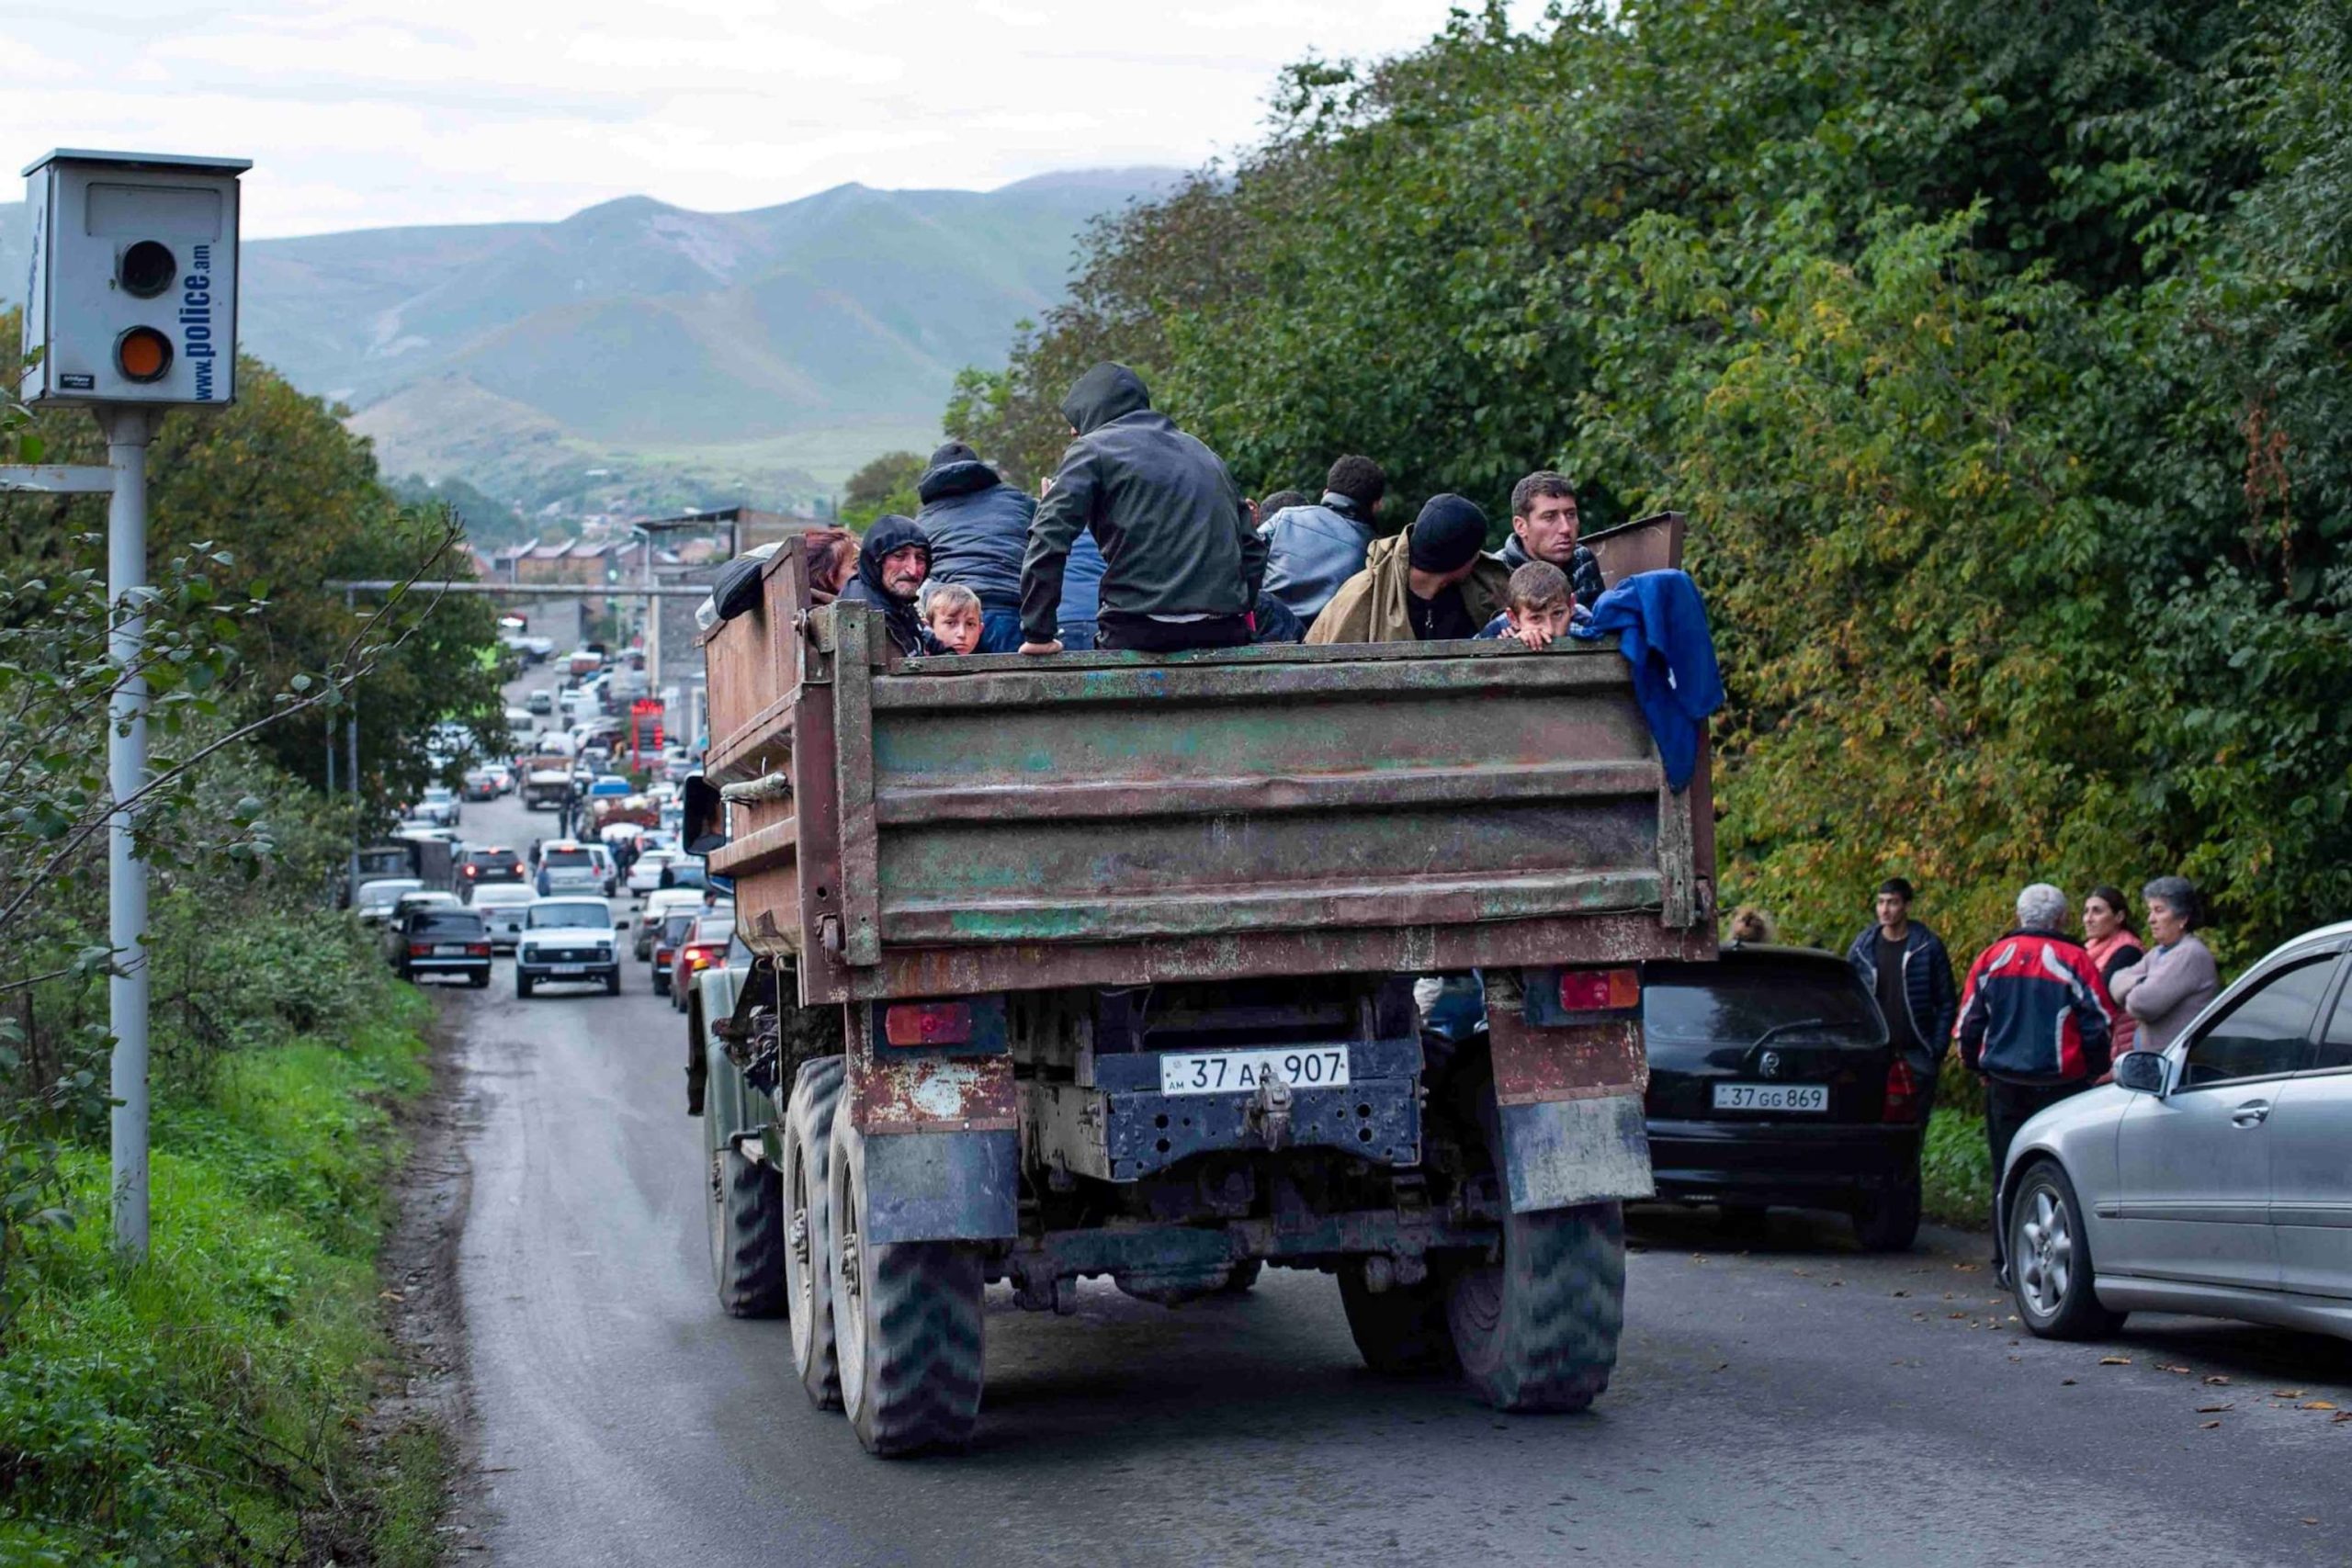 "Tragic Blast Claims 20 Lives and Leaves Nearly 300 Injured as Armenia Refugees Seek Safety from Disputed Enclave"